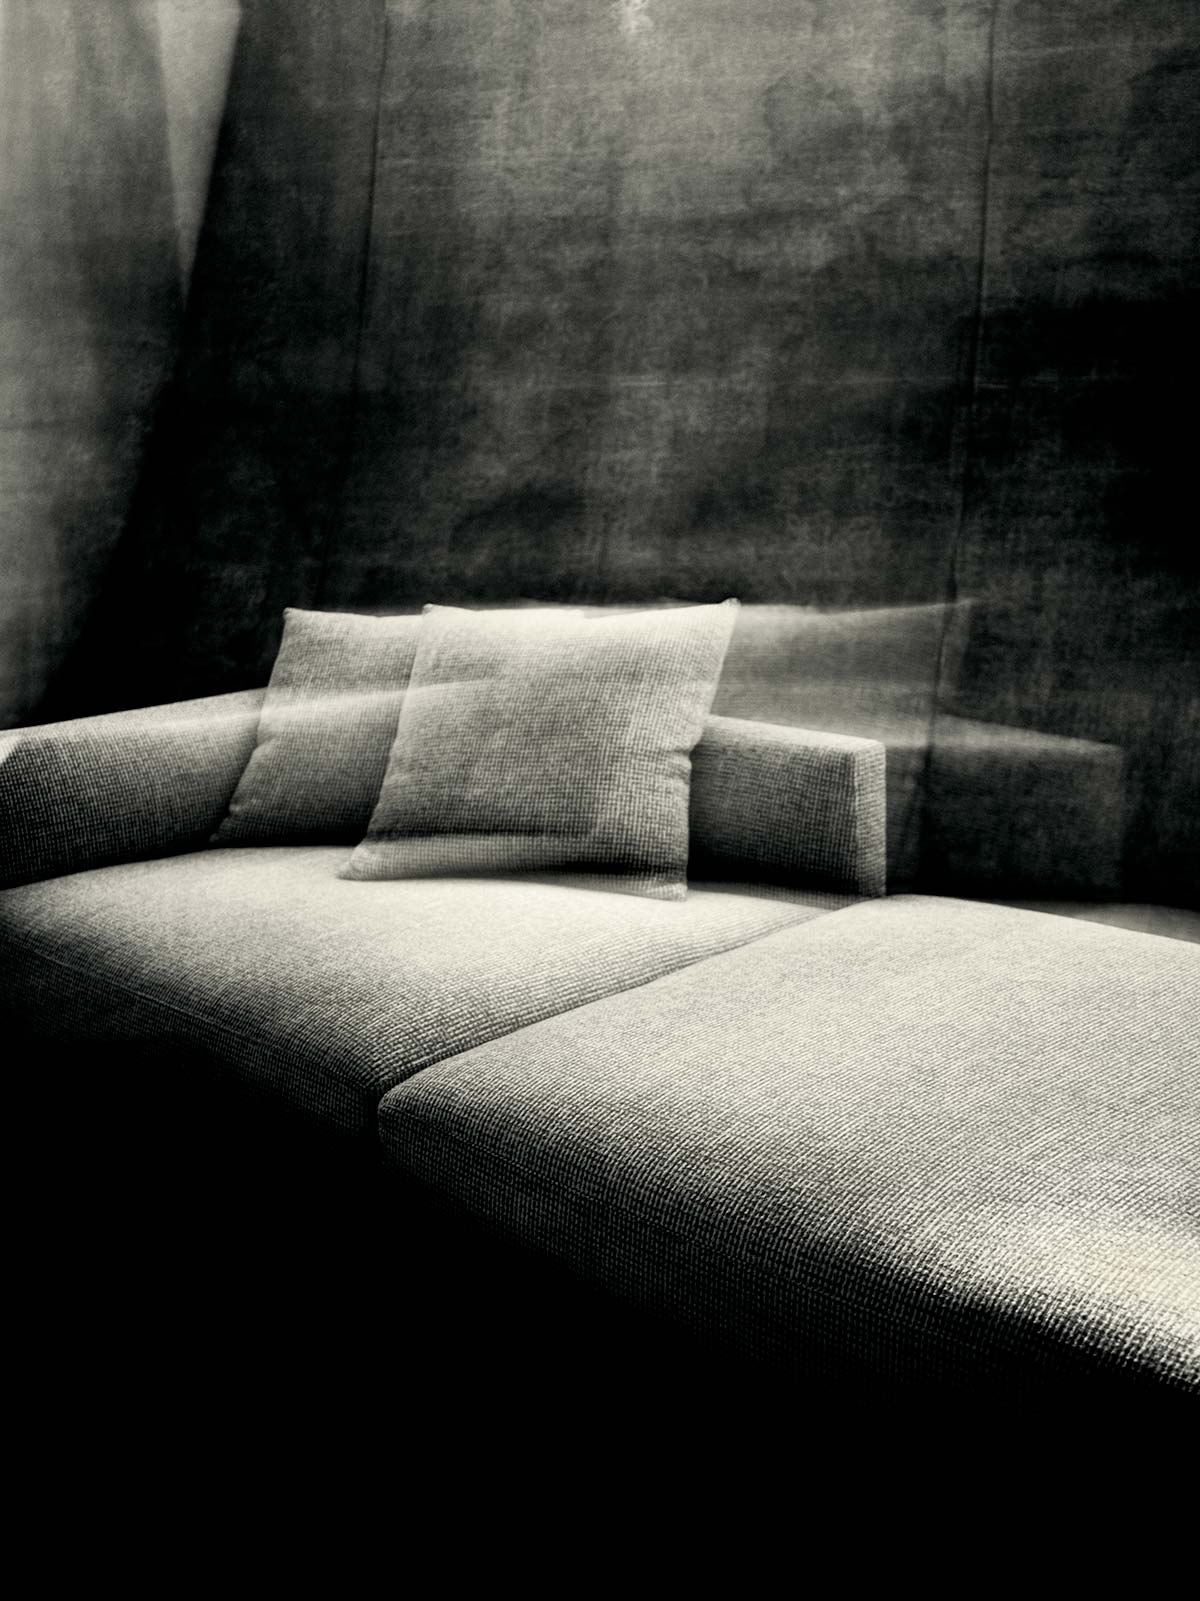 Poliform - Time, Light, Space by Paolo Roversi